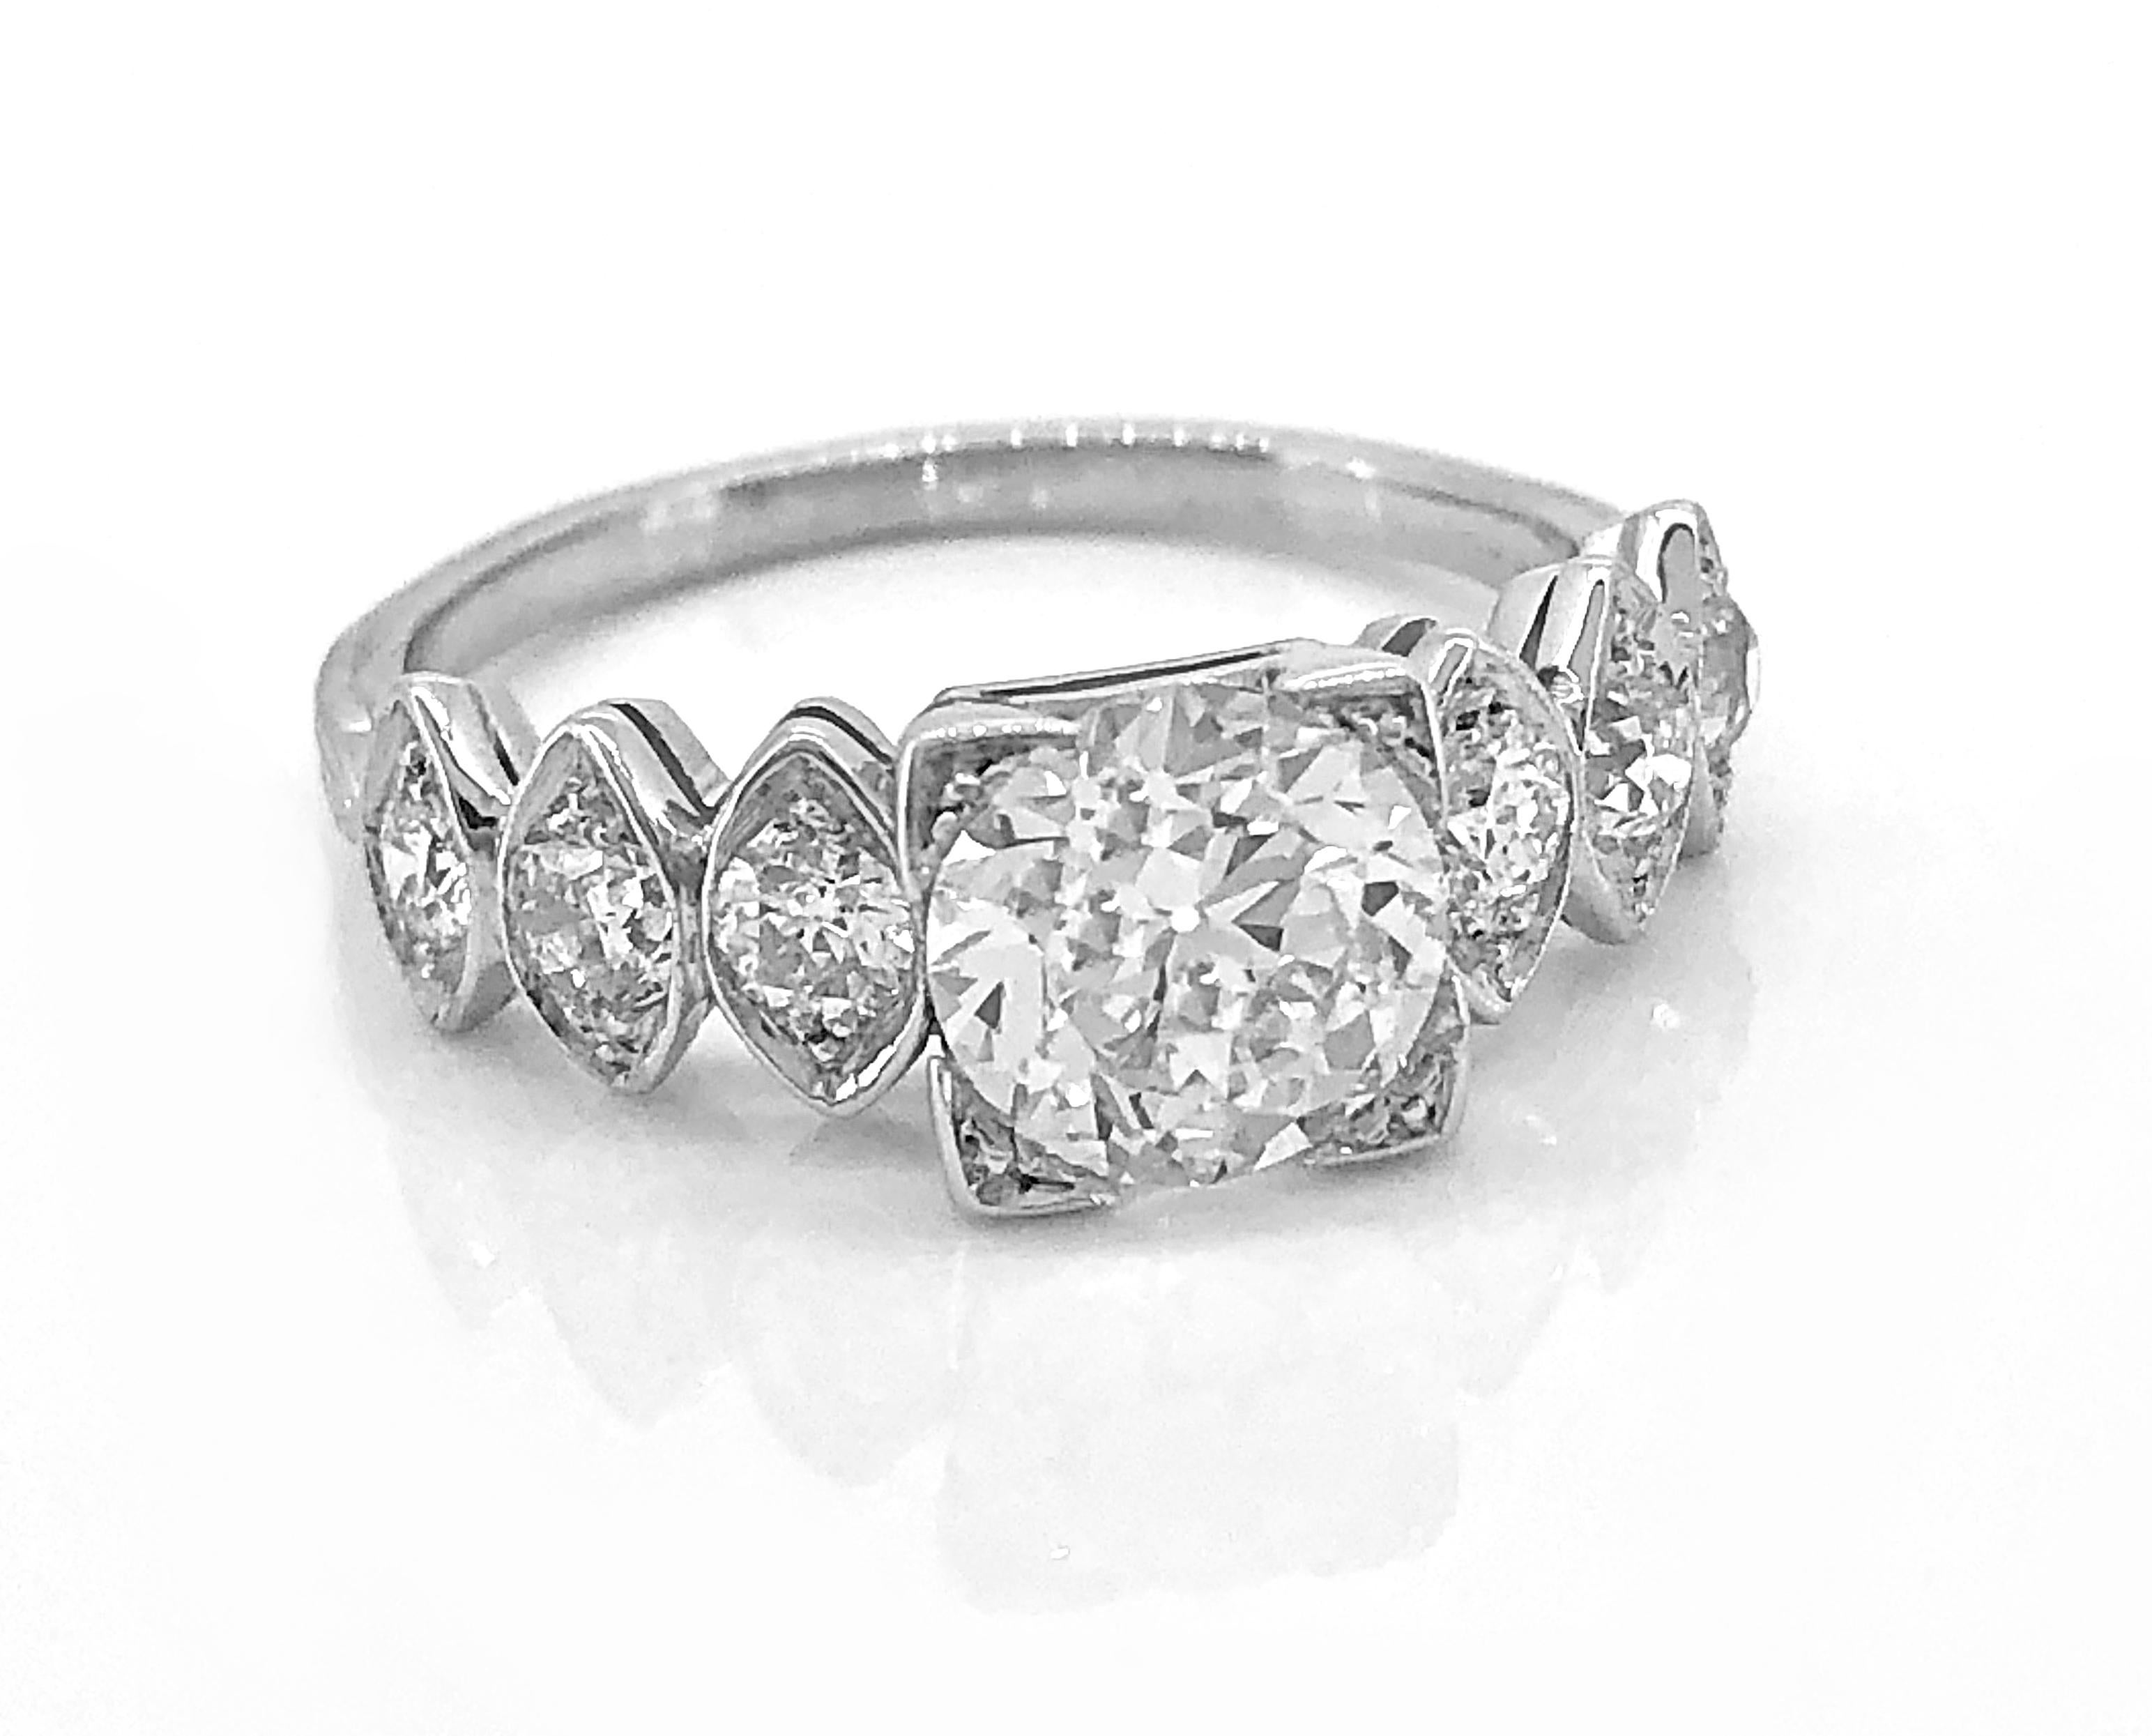 This is a beautiful antique engagement ring featuring a 1.02ct. apx. European cut center diamond set with trefoil prongs. The clarity is VS1 and I-J color. The .33ct. apx. T.W. of accenting diamonds are set in marquise shaped designs on each side of